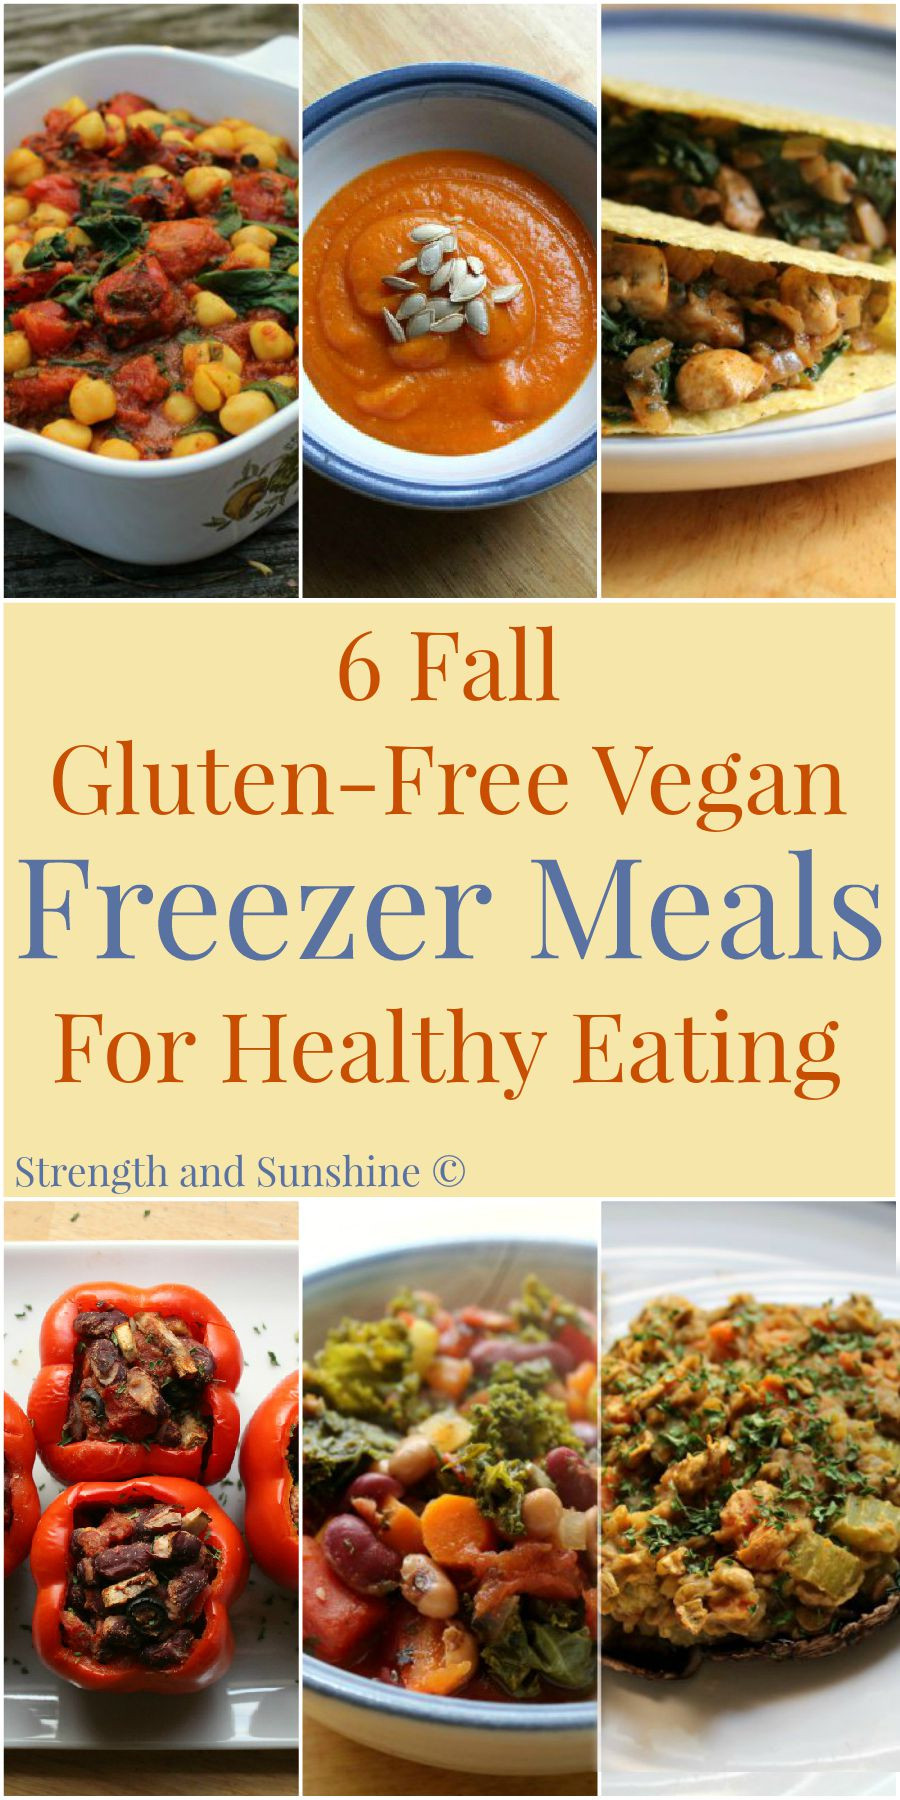 Gluten Free Healthy Recipes
 6 Fall Gluten Free Vegan Freezer Meals For Healthy Eating